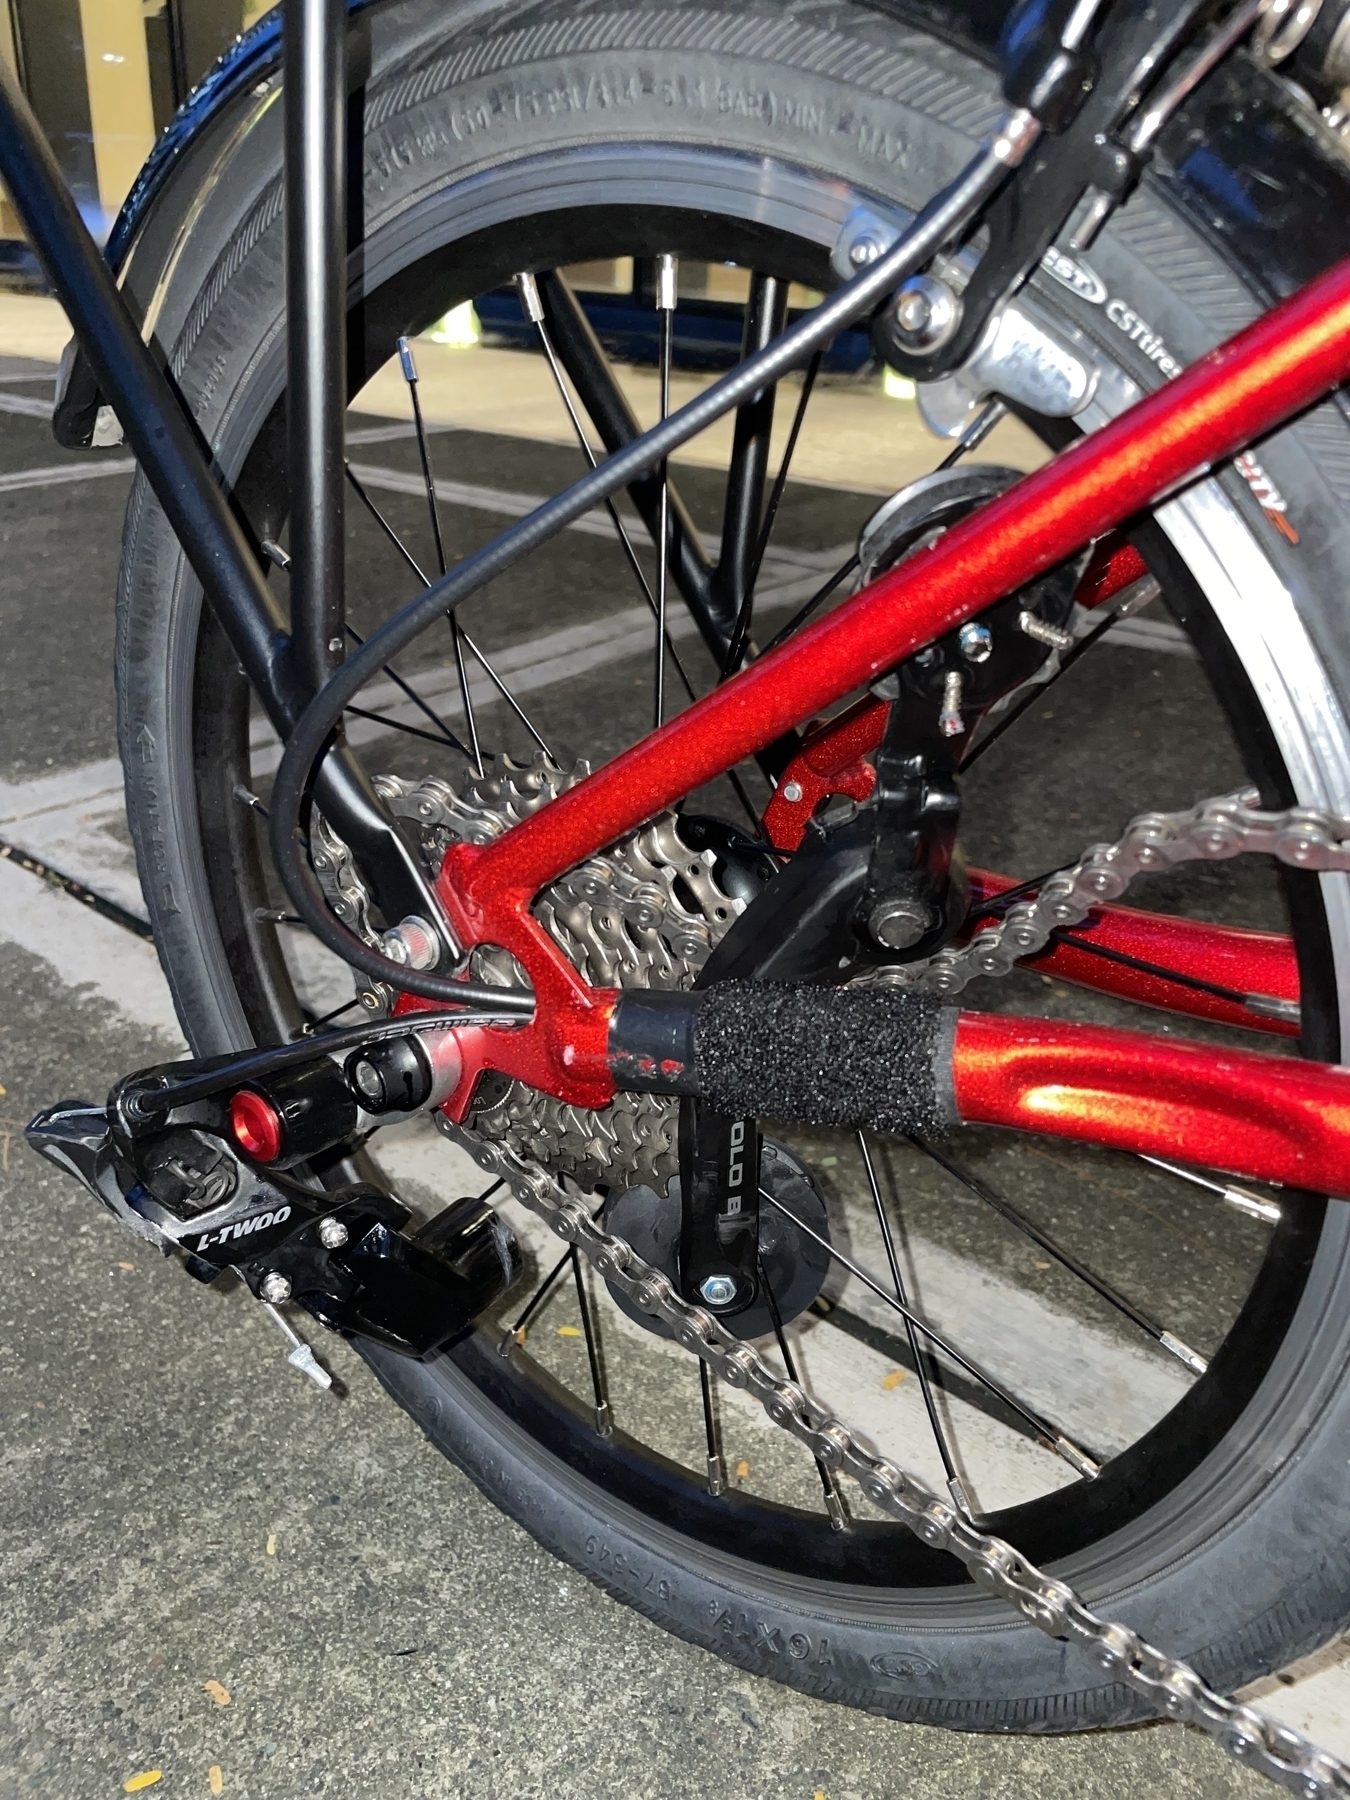 Chi’s folded bike, focusing on the place where the rear derailleur and gears are. The chain tensioner is broken, and the bike’s chain is not in its tensed state anymore.